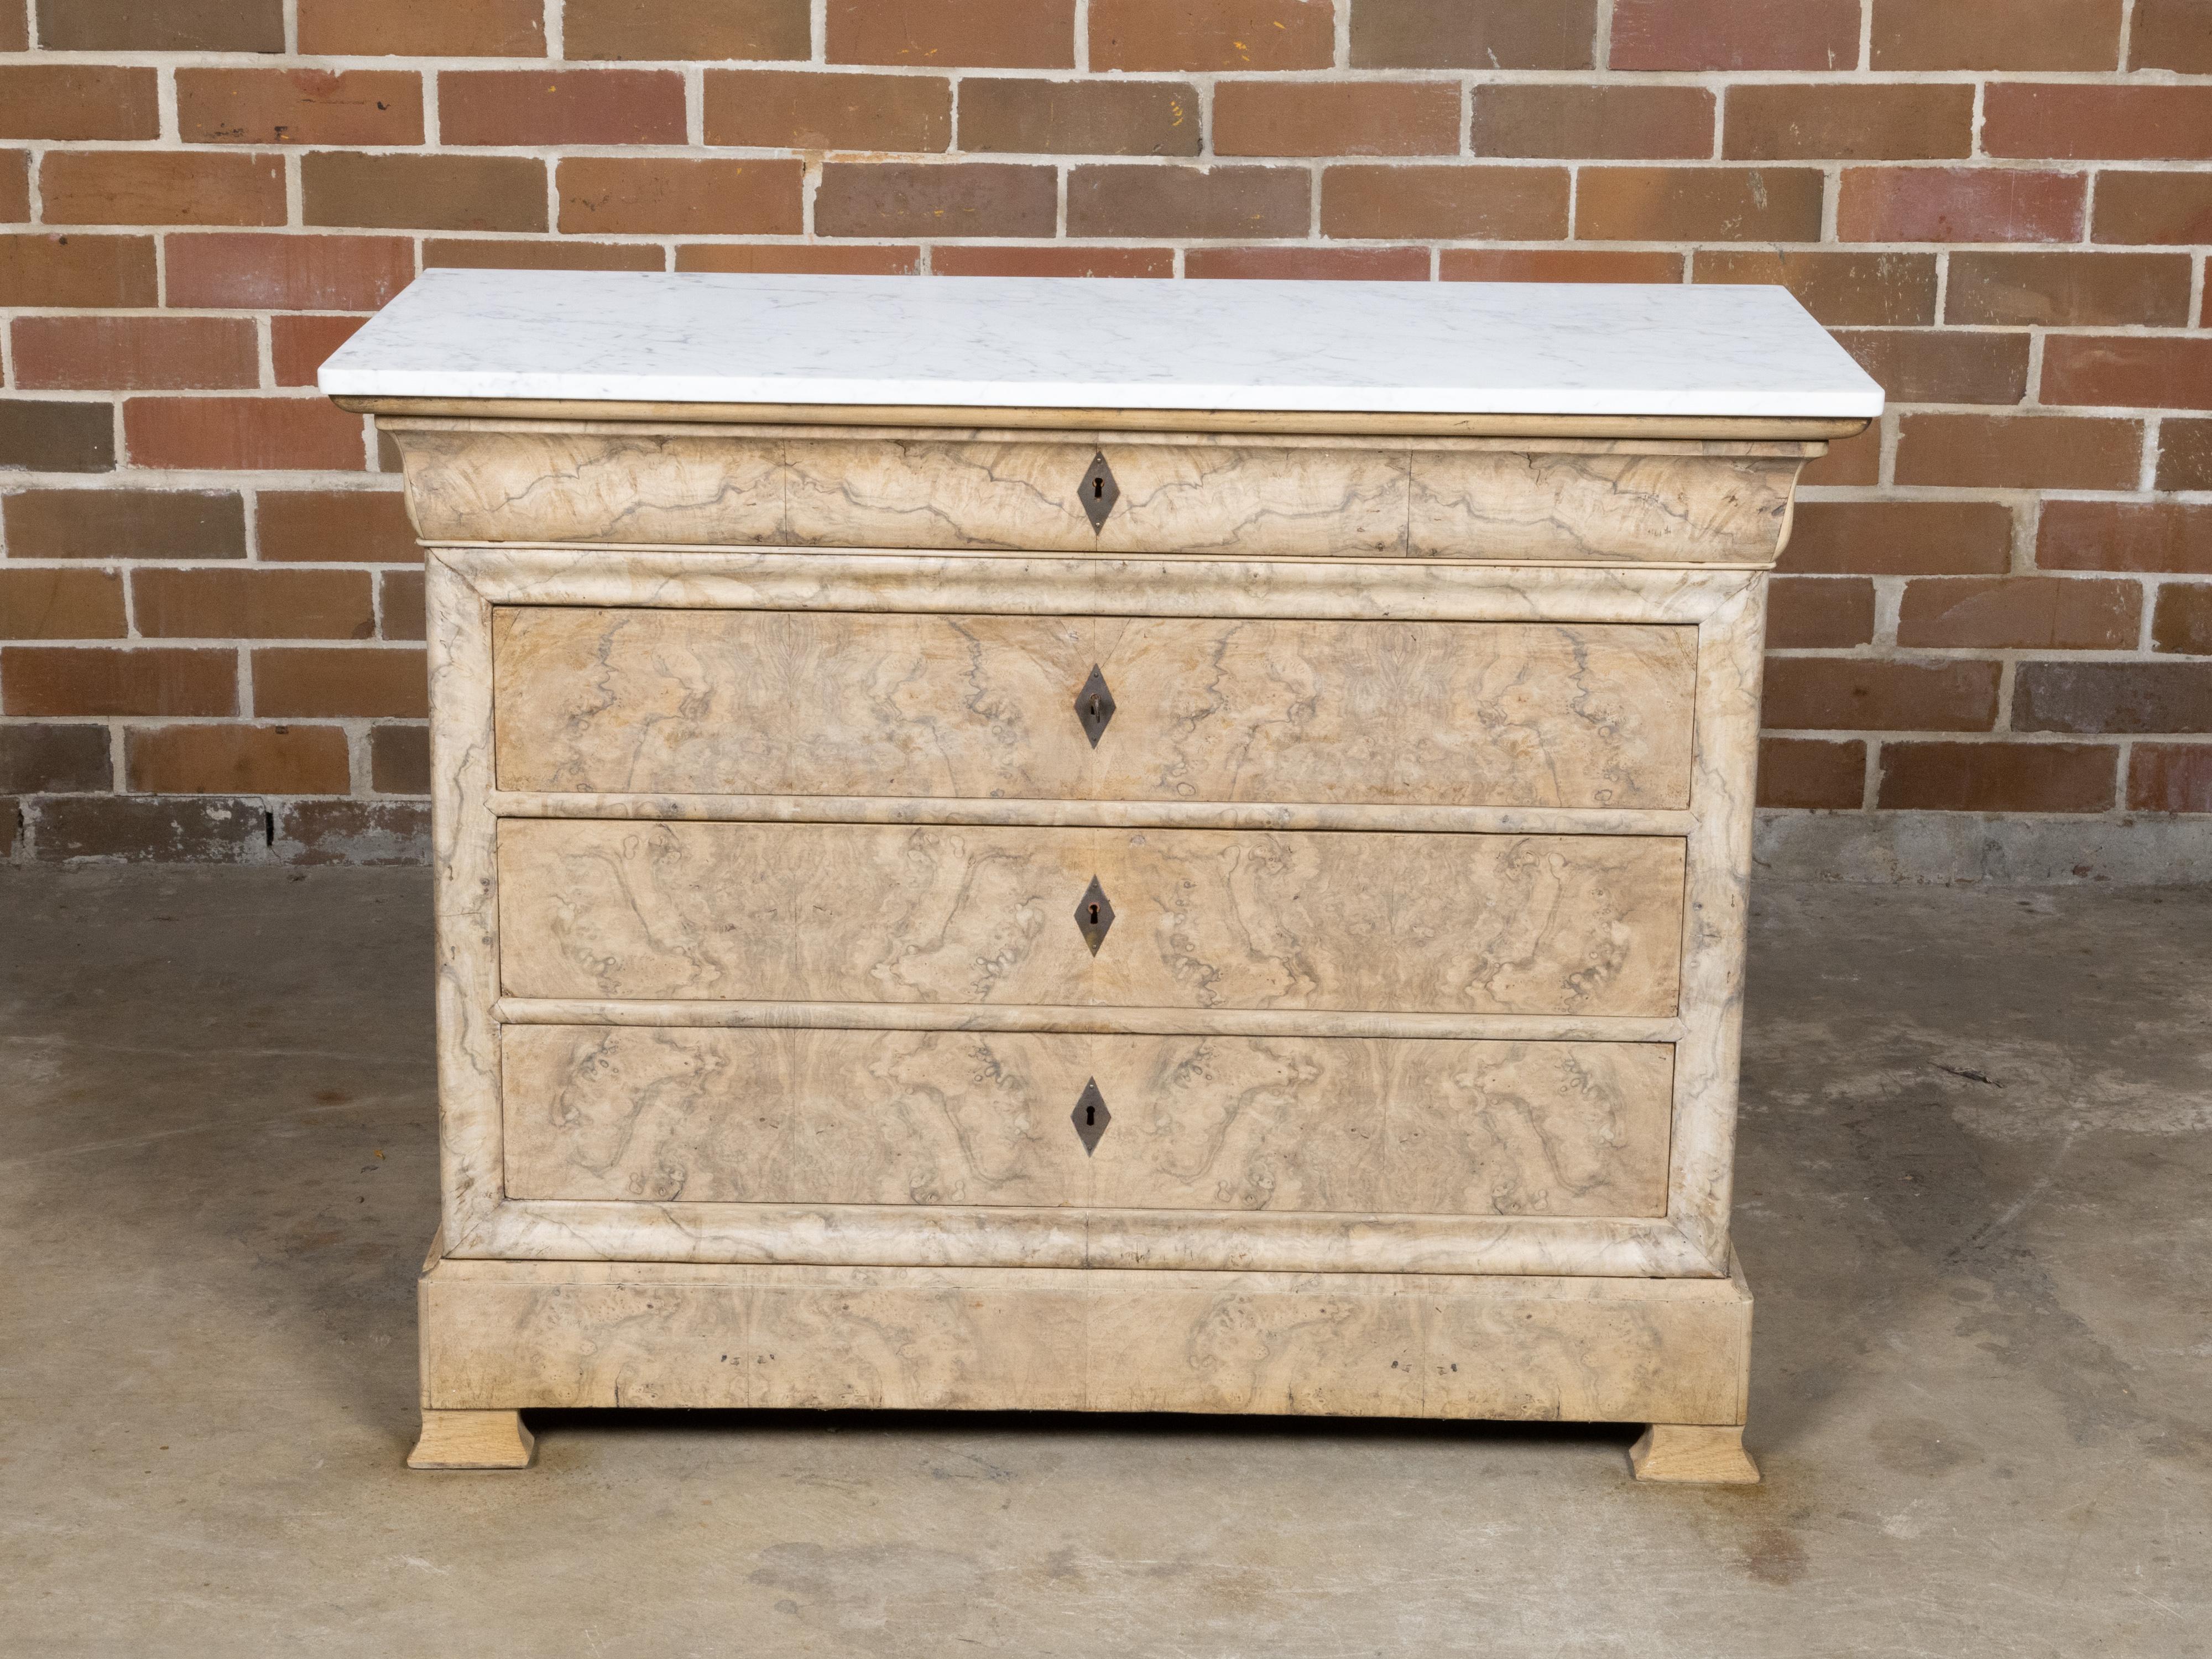 A French Louis-Philippe bleached wood commode from the 19th century with bookmatched veneer, white marble top and four drawers. This French Louis-Philippe bleached wood commode from the 19th century exudes a subtle elegance and refined taste, making